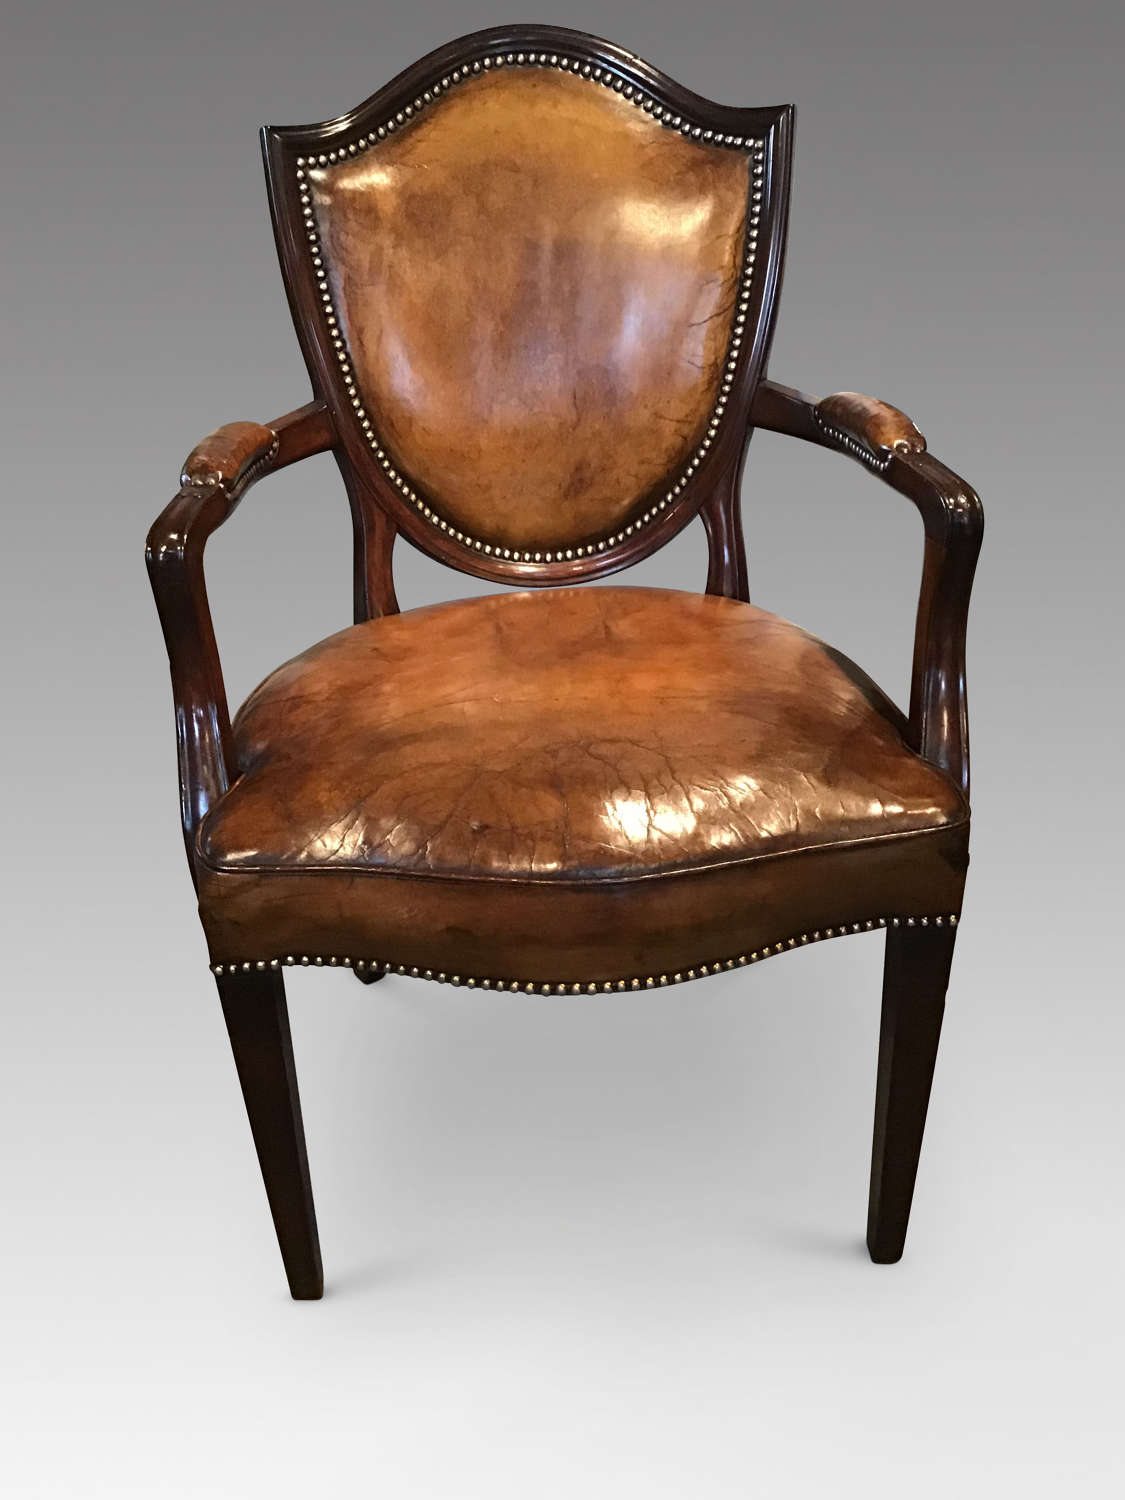 Antique mahogany and leather chair